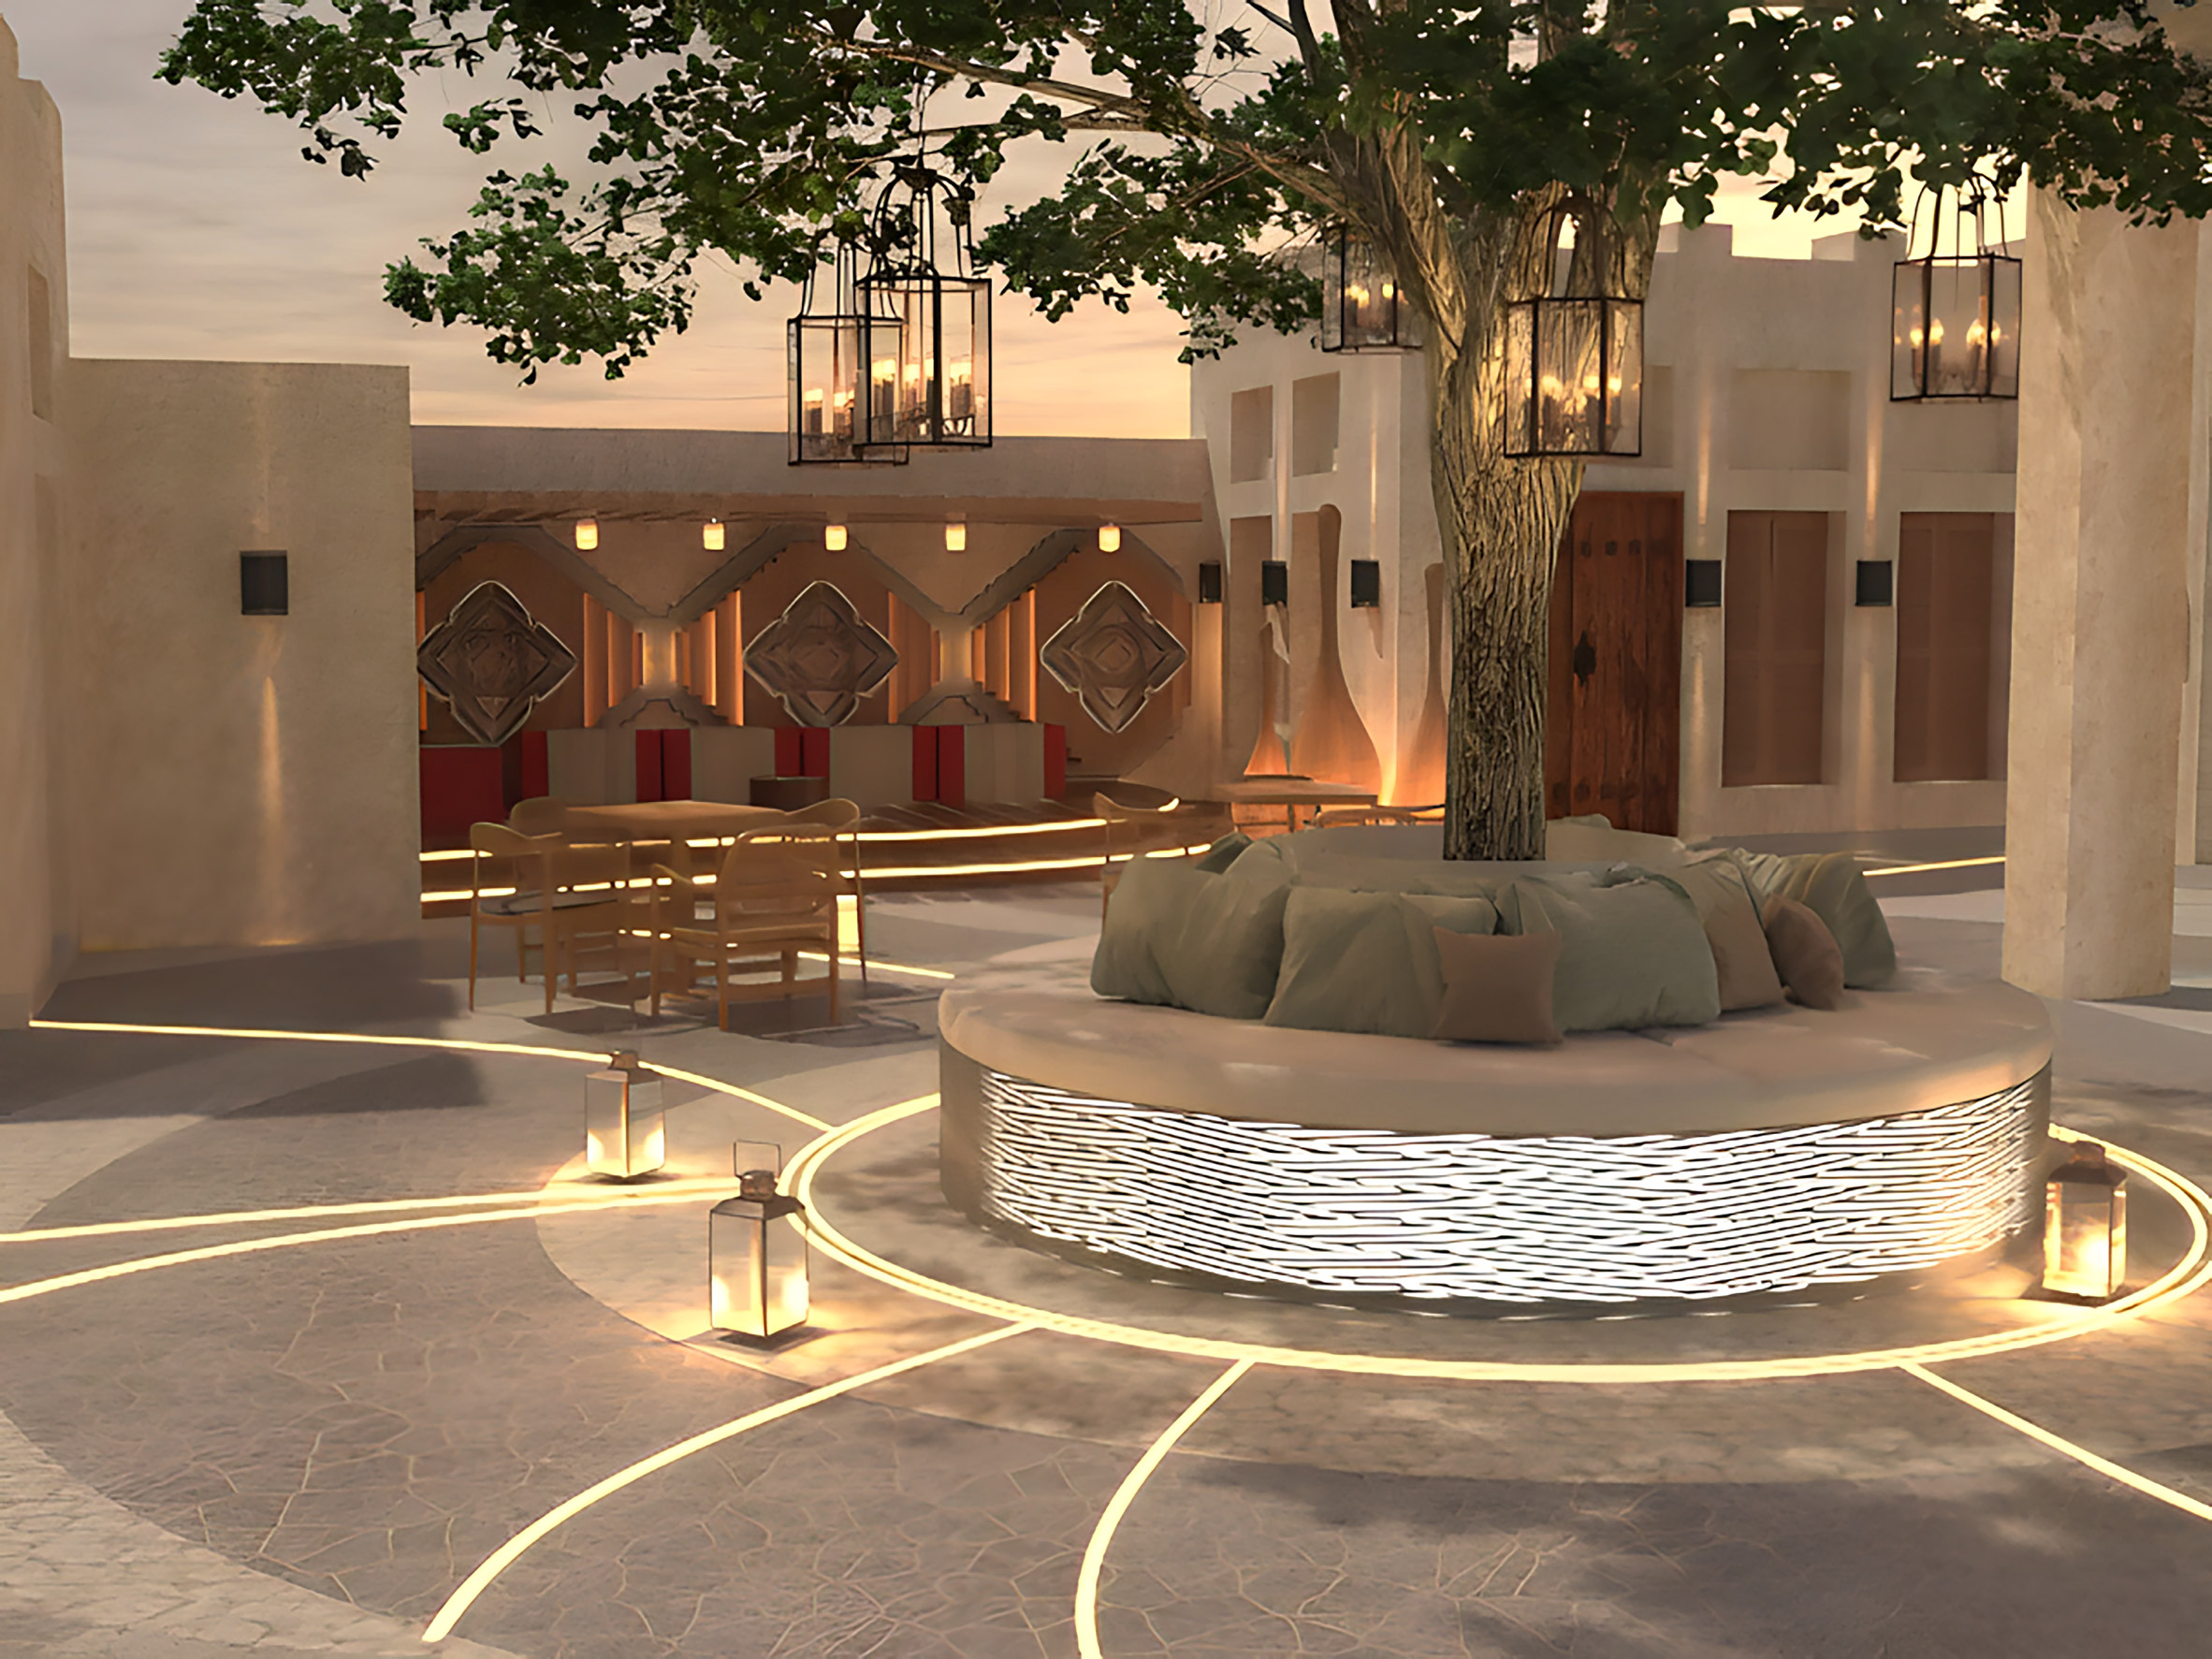 Rendering of an outdoor seating area with tree and lanterns